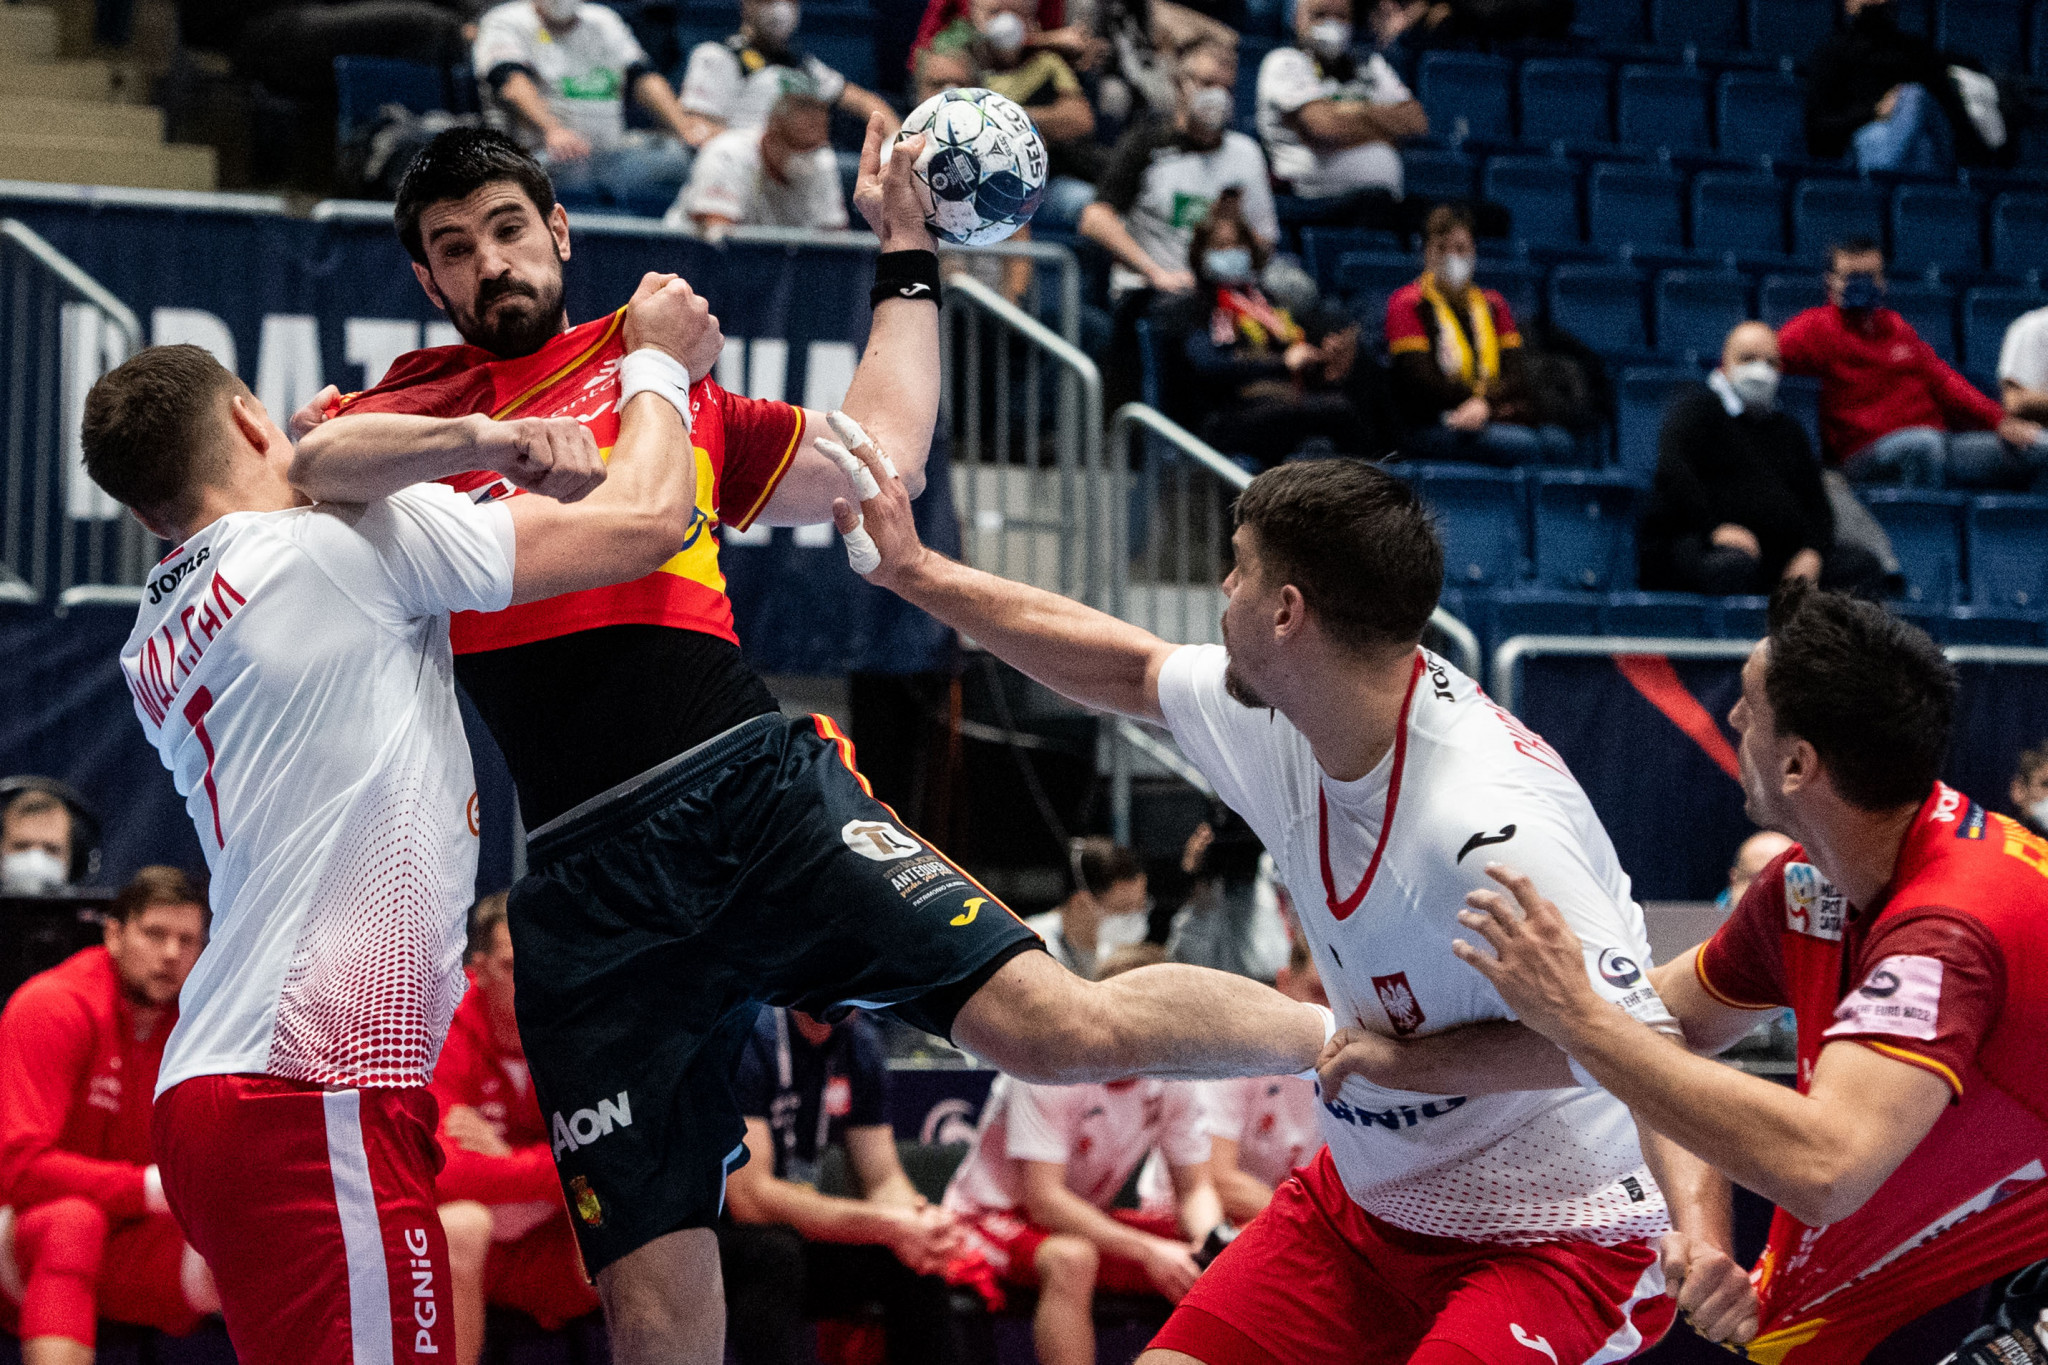 Spain and Sweden book semi-final places at Men’s European Handball Championship with dramatic one-point wins